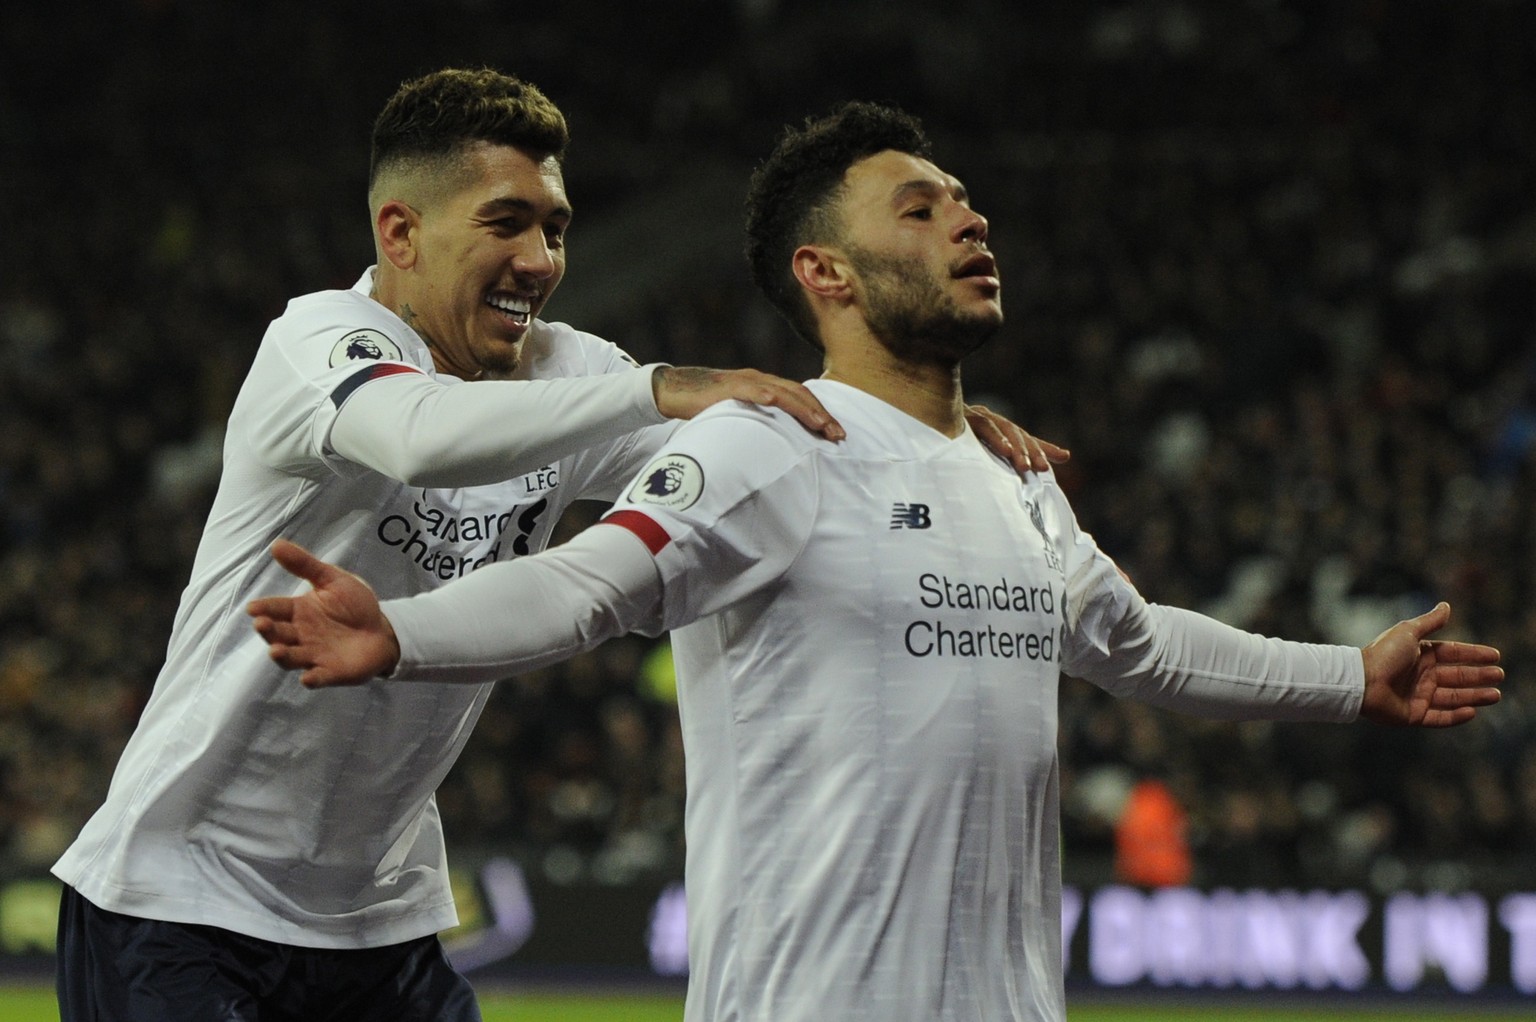 epa08176963 Alex Oxlade-Chamberlain (R) of Liverpool celebrates with teammate Roberto Firmino after scoring during the English Premier League soccer match between West Ham United and Liverpool FC held ...